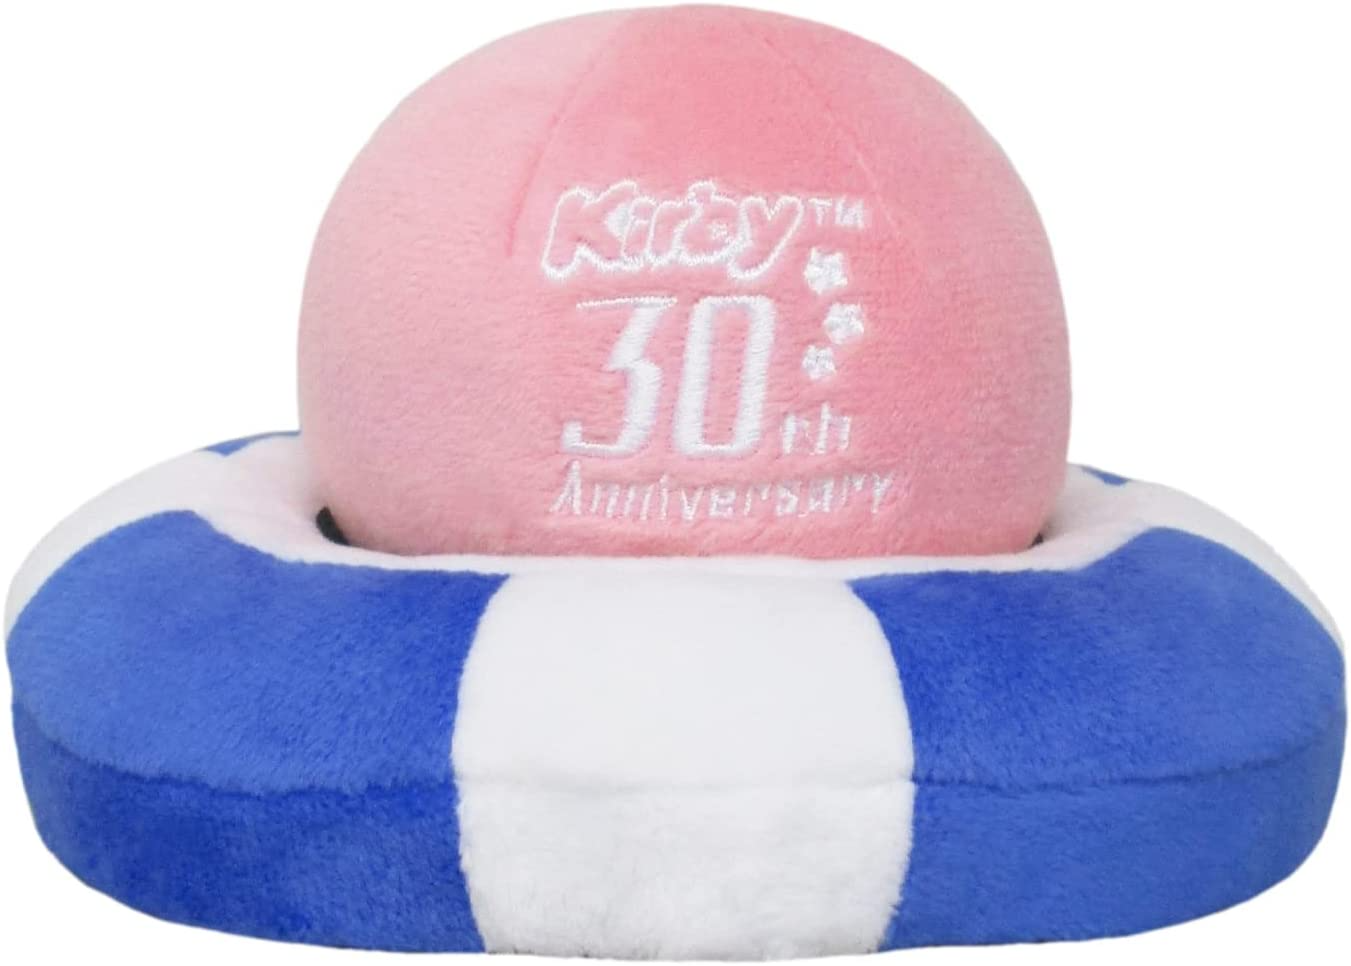 Hole in One KIRBY Launch 30th Anniversary Sanei Plush Toy (3.7 in - 9.5 cm) NEW